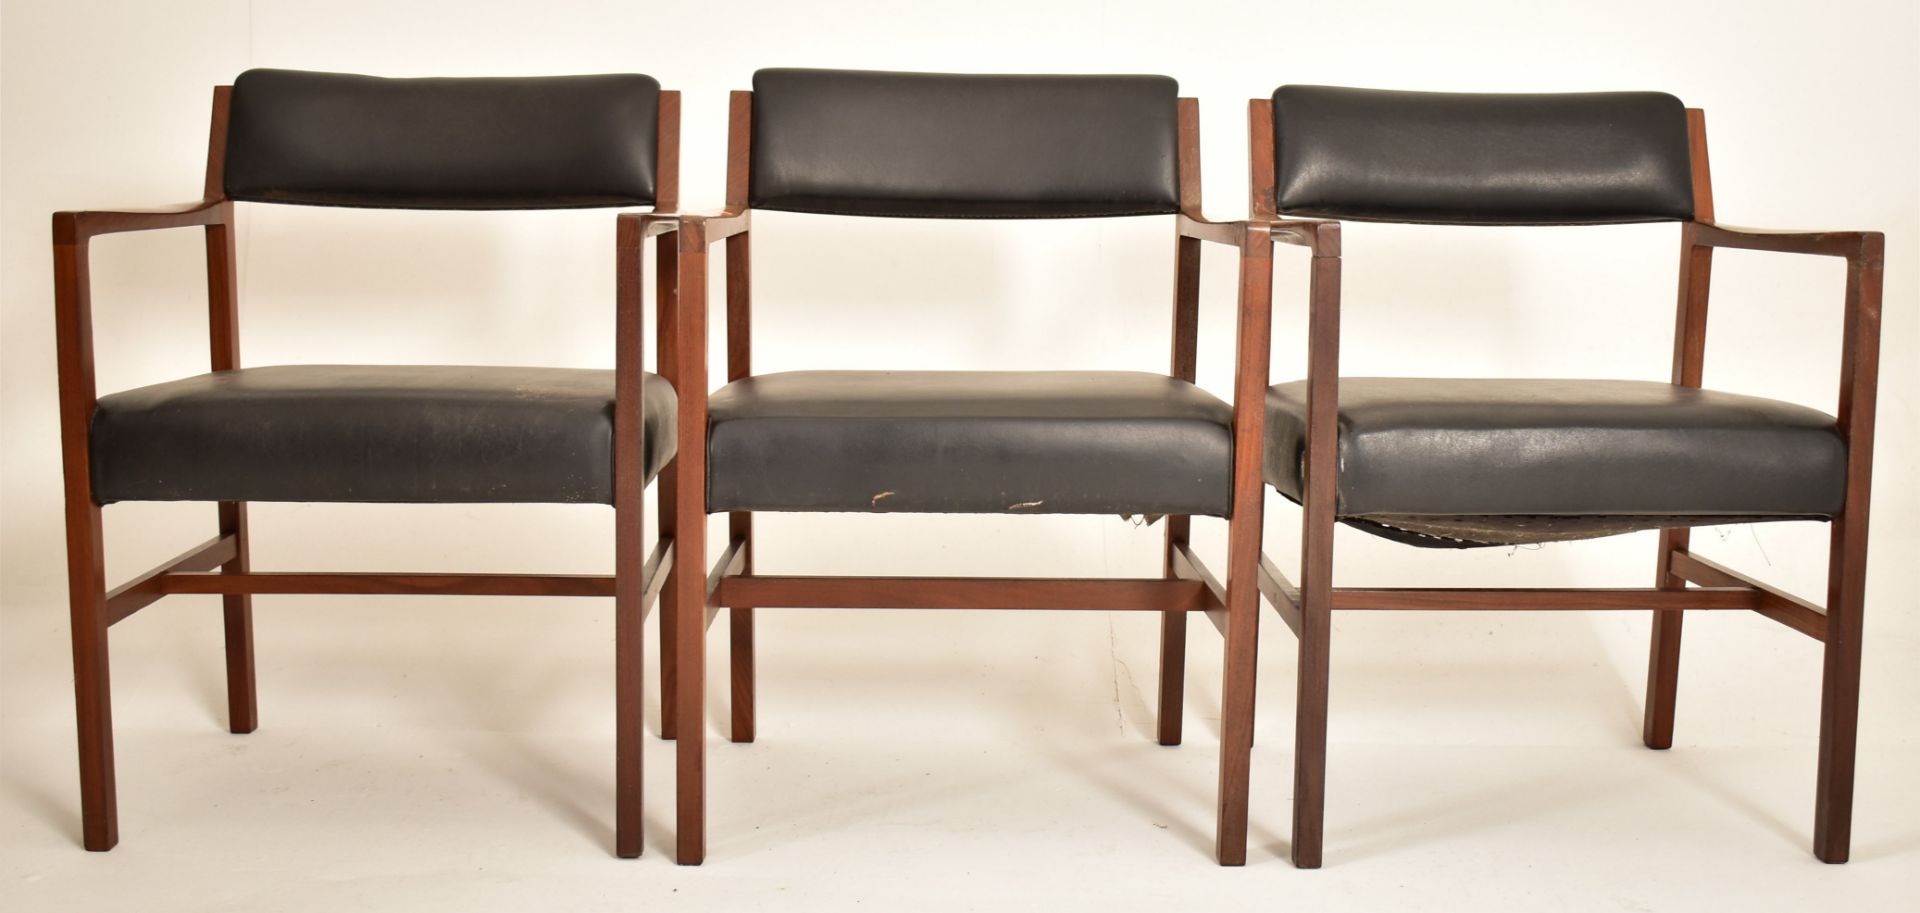 ALFRED COX - MATCHING SET OF SIX TEAK DINING CHAIRS - Image 3 of 7